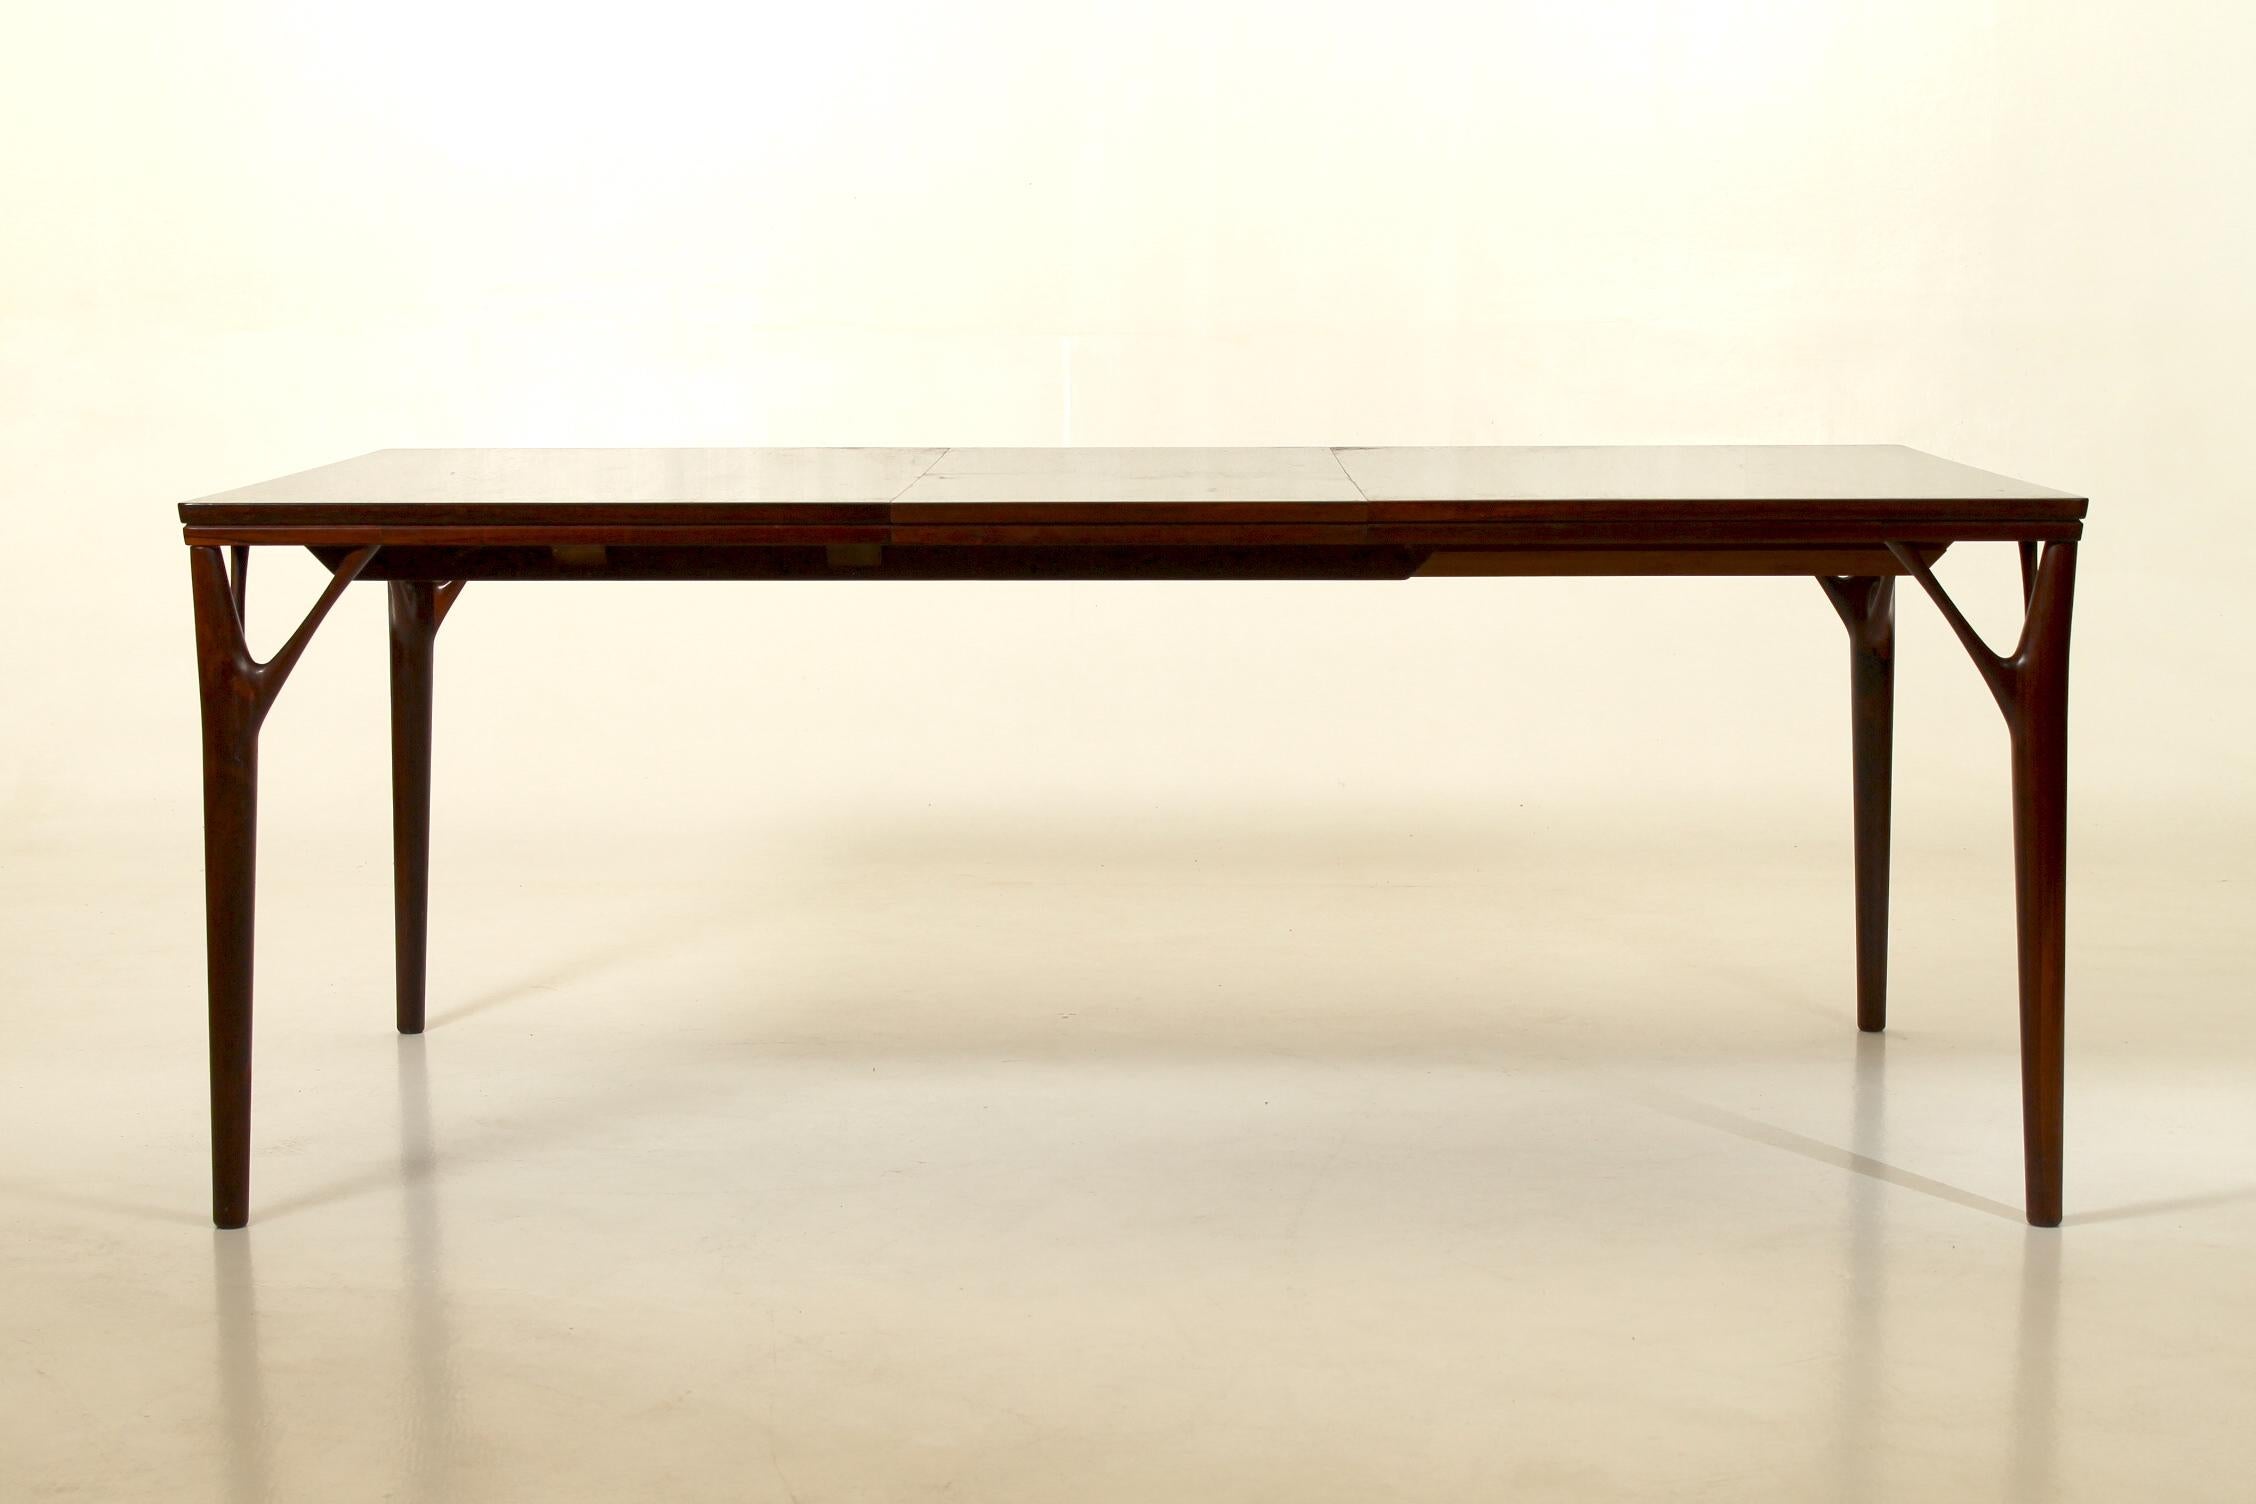 Danish rectangular dining table in rosewood designed by Helge Vestergaard Jensen for Søren Horn, in the late 1960s. 8-12 seats, up-and-over extension flap, hidden underneath the table top.
Extension measures 46 cm.
Max length is 186 cm cm.